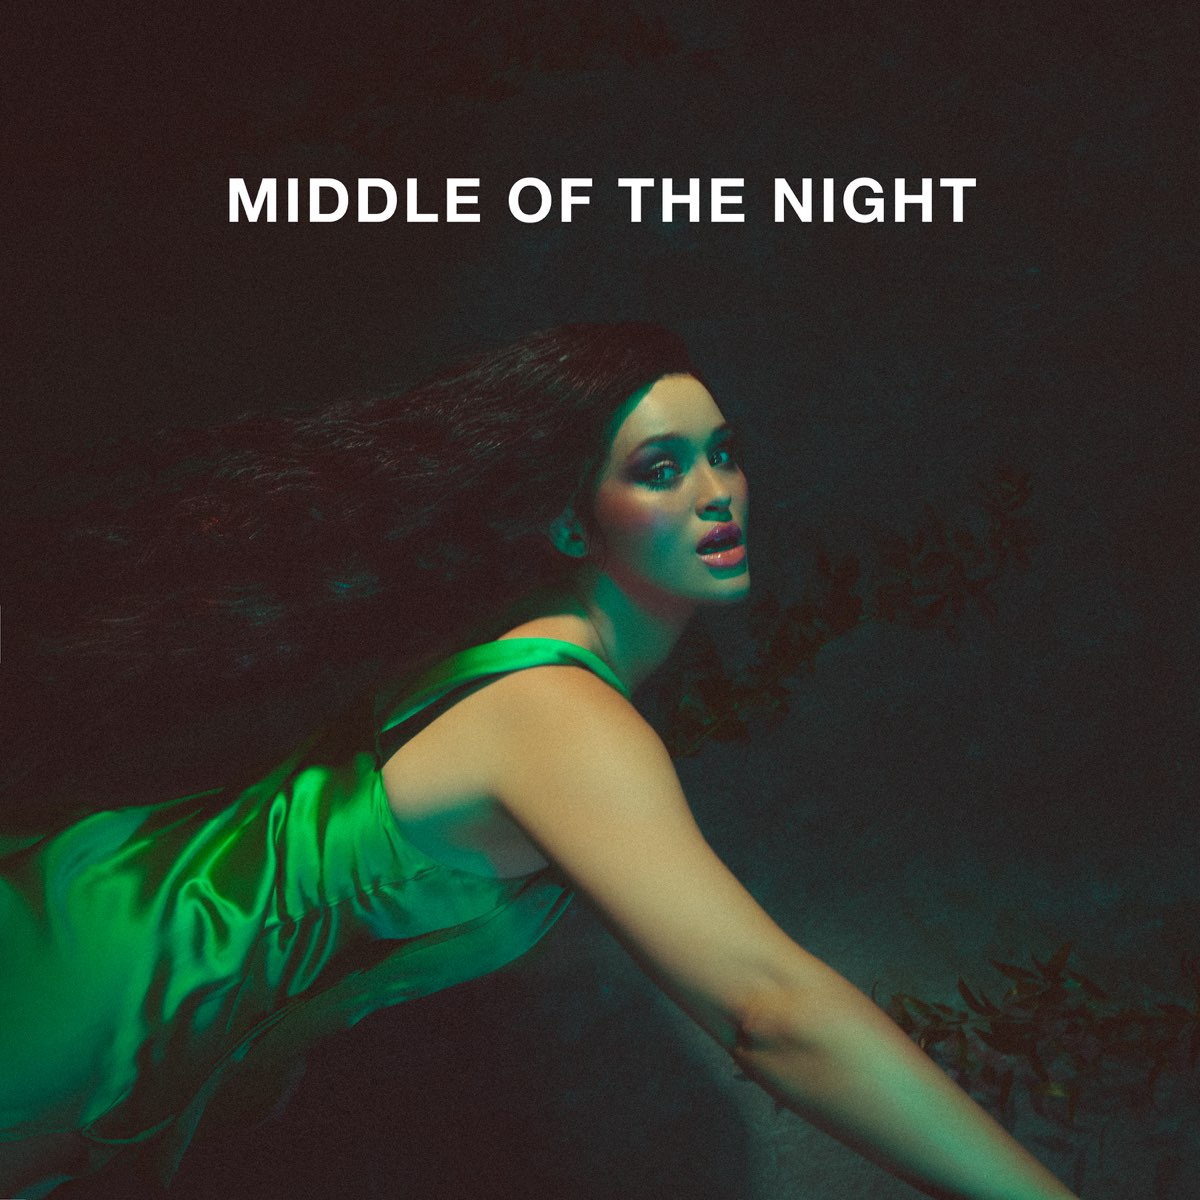 Middle of the night mp3. Элли Duhe. Elley Duhe Middle of the. Middle of the Night. Элли Дуэ Middle of the Night.